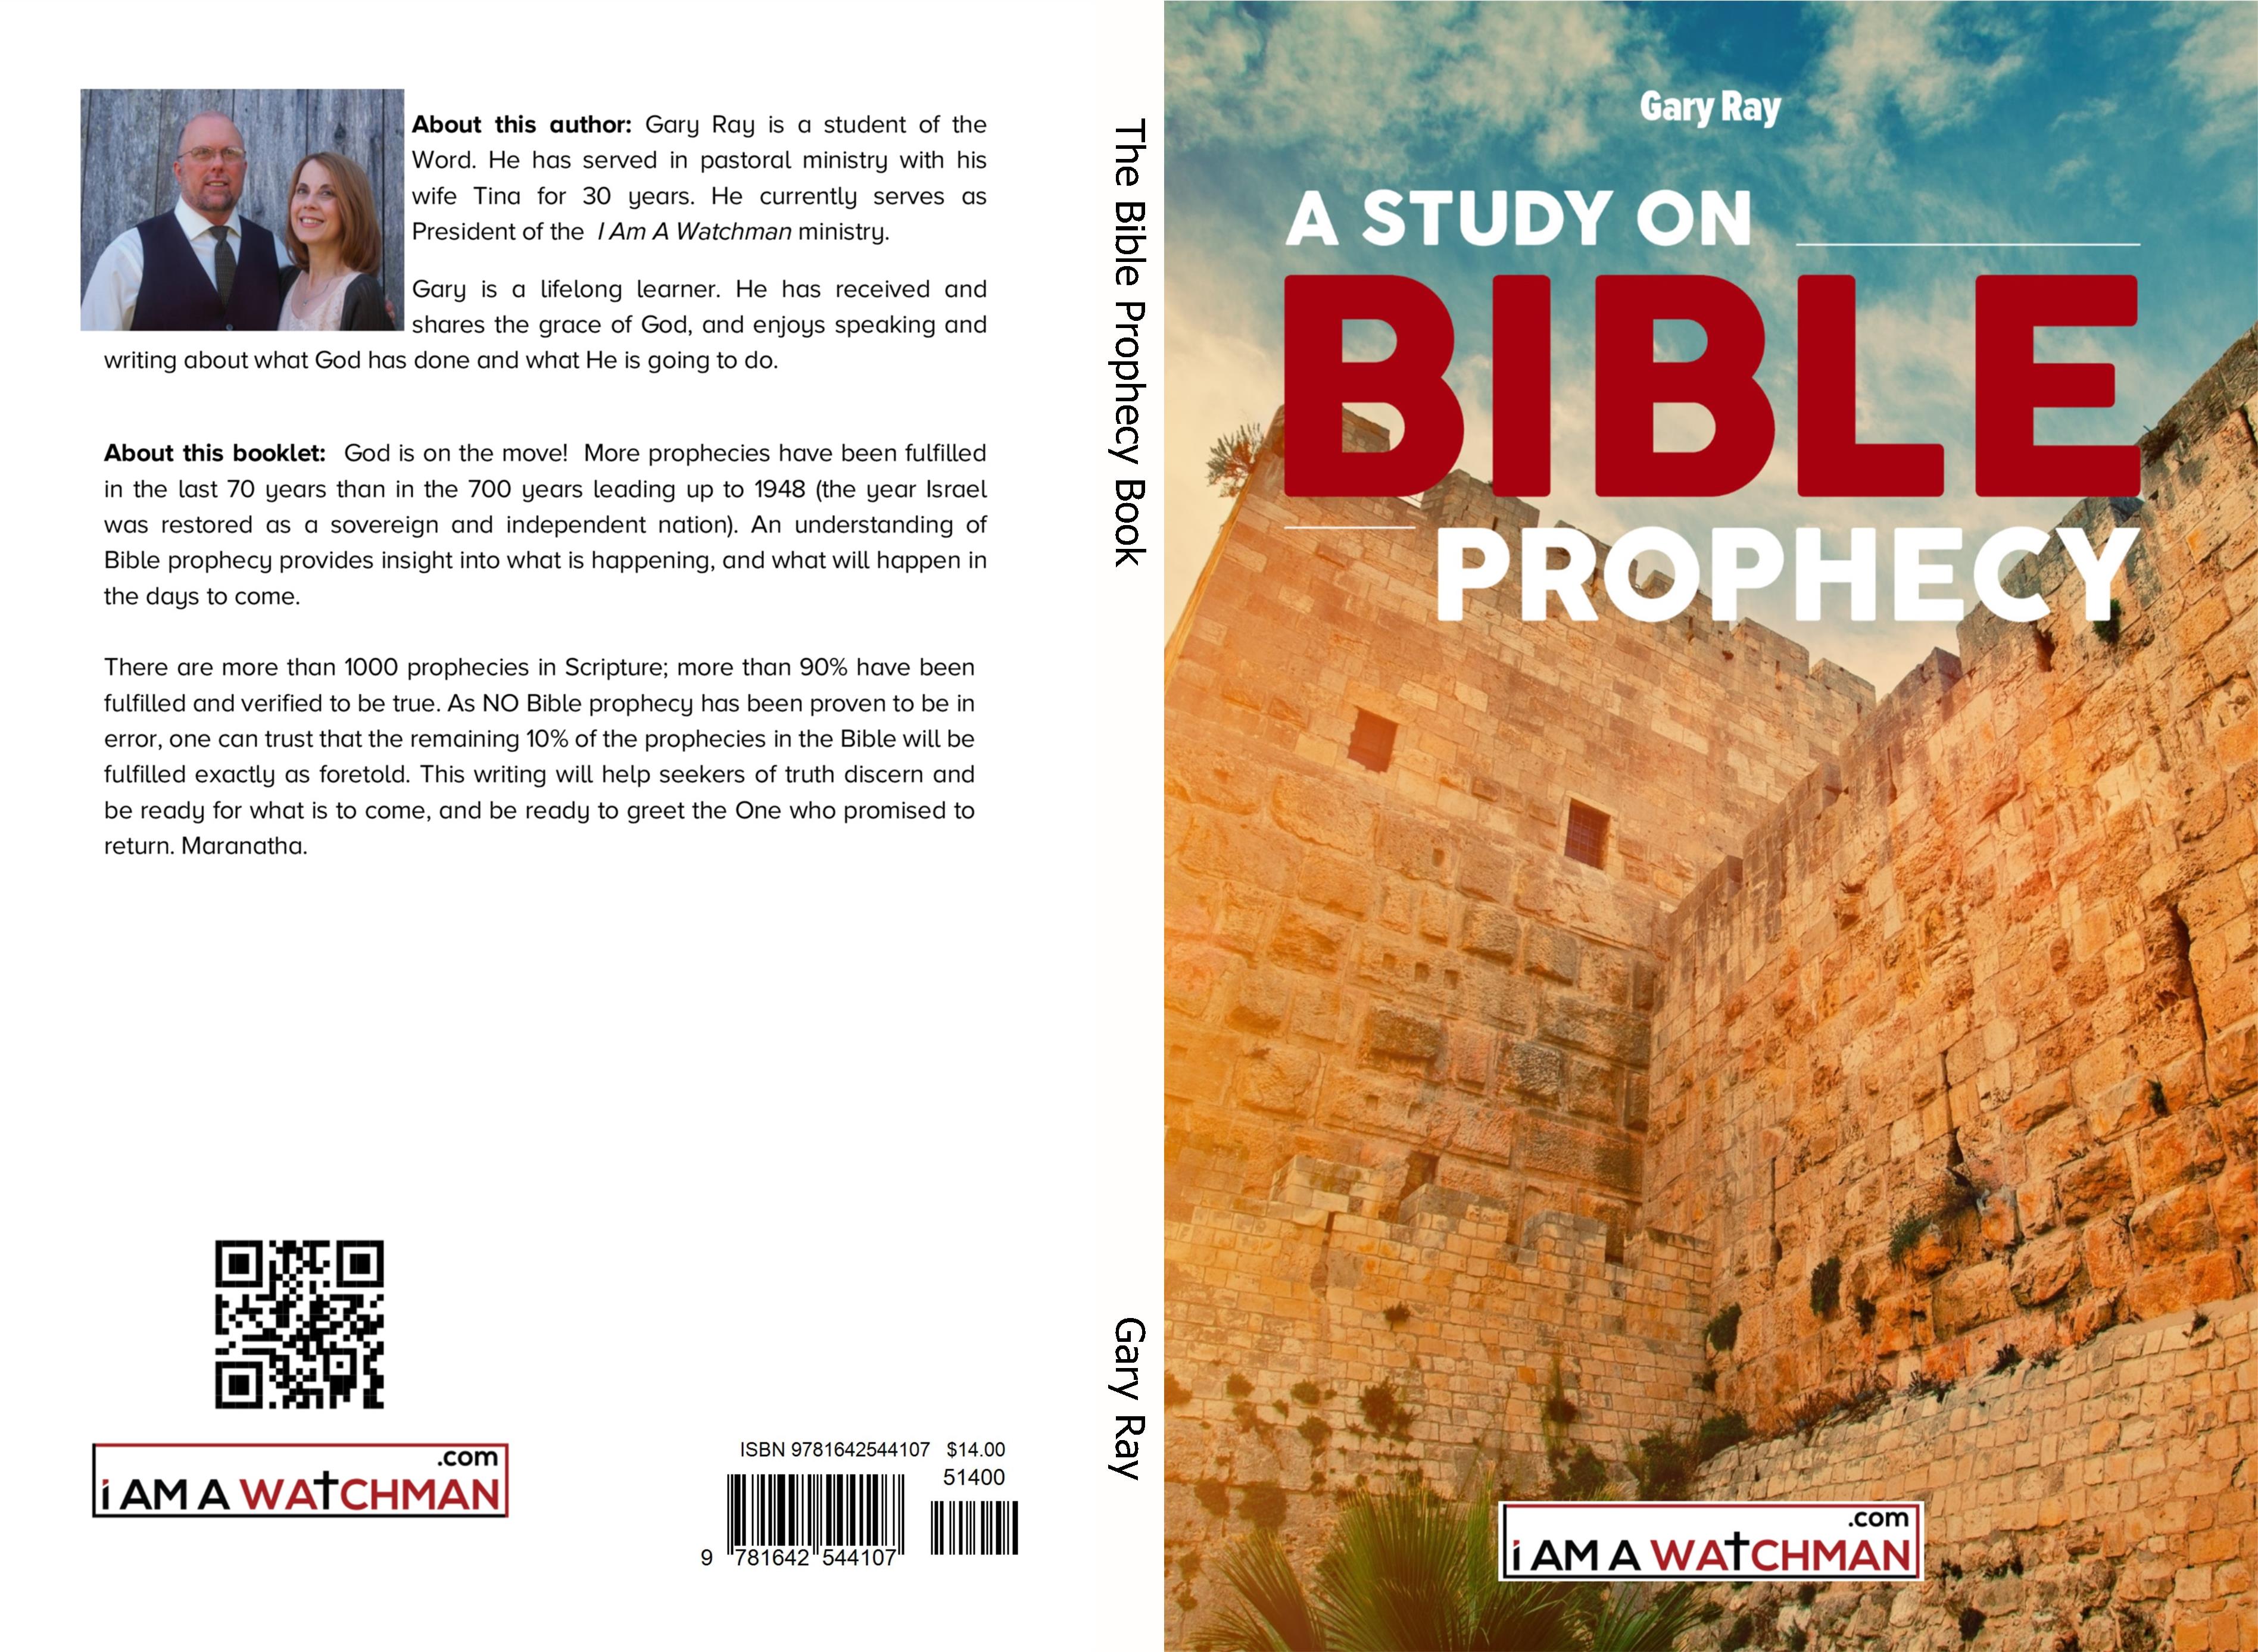 The Bible Prophecy Book cover image